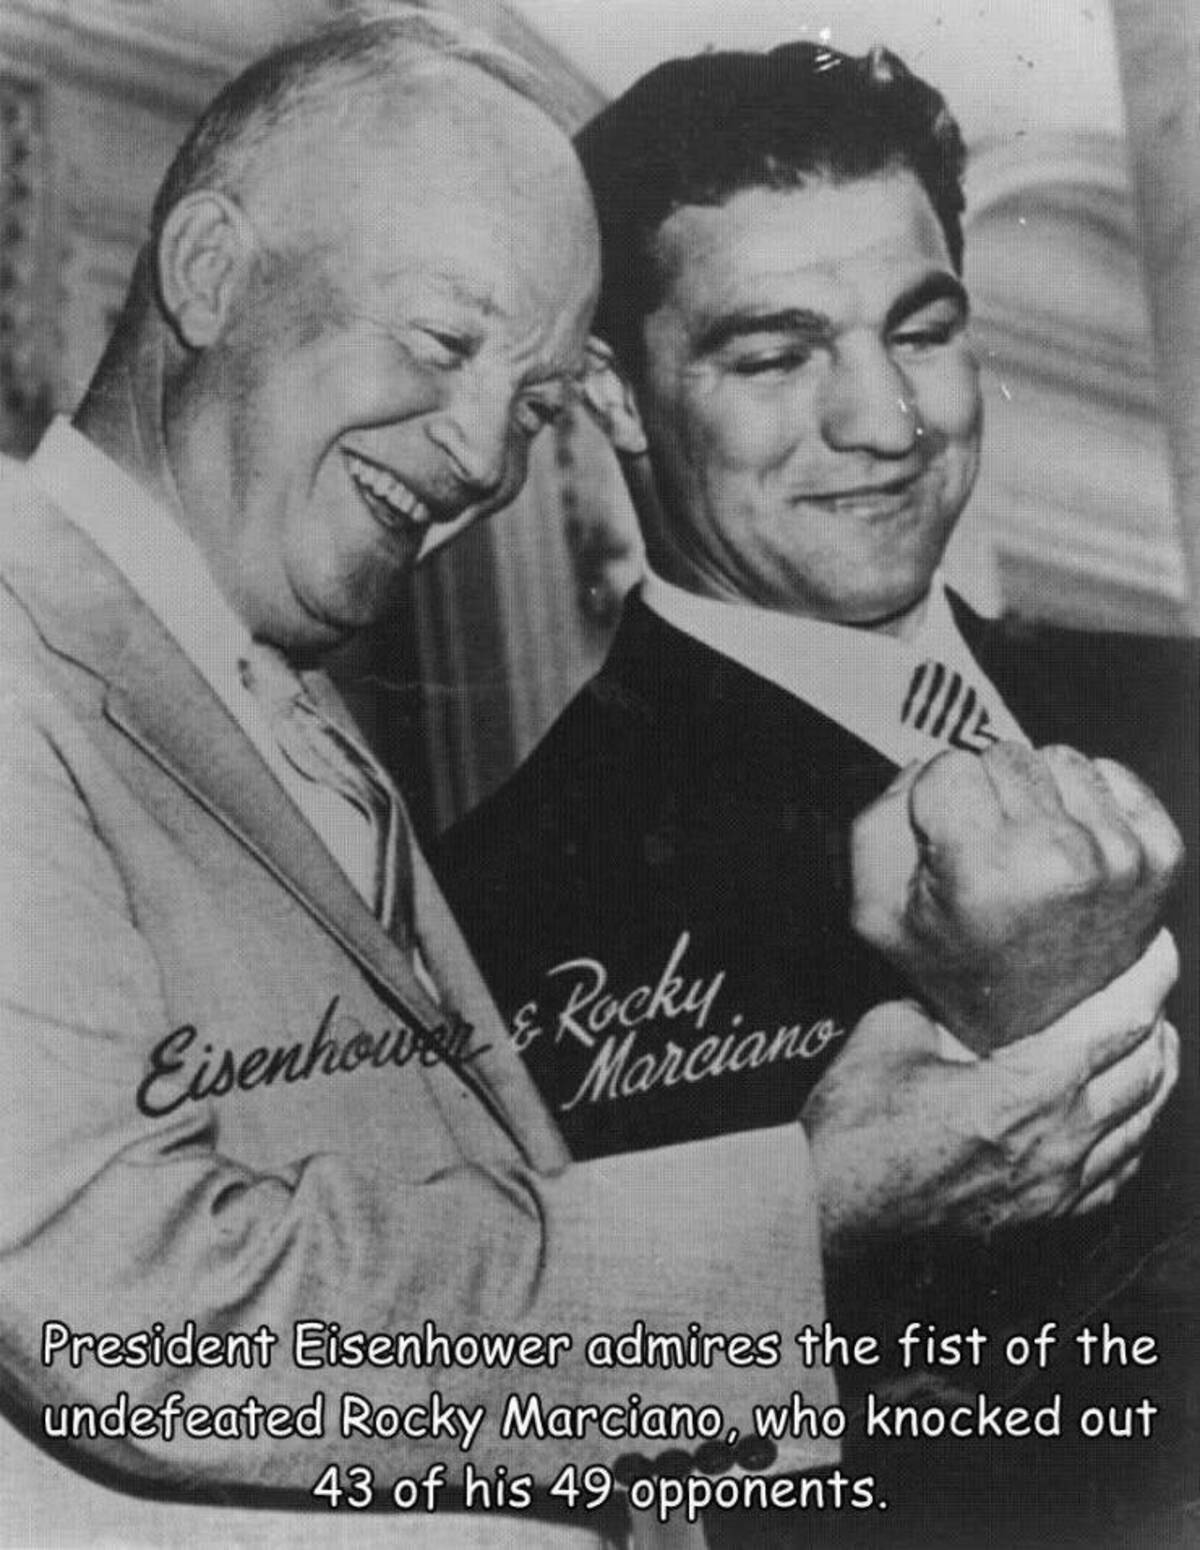 rocky marciano eisenhower - Eisenhower & Rocky Marciano President Eisenhower admires the fist of the undefeated Rocky Marciano, who knocked out 43 of his 49 opponents.